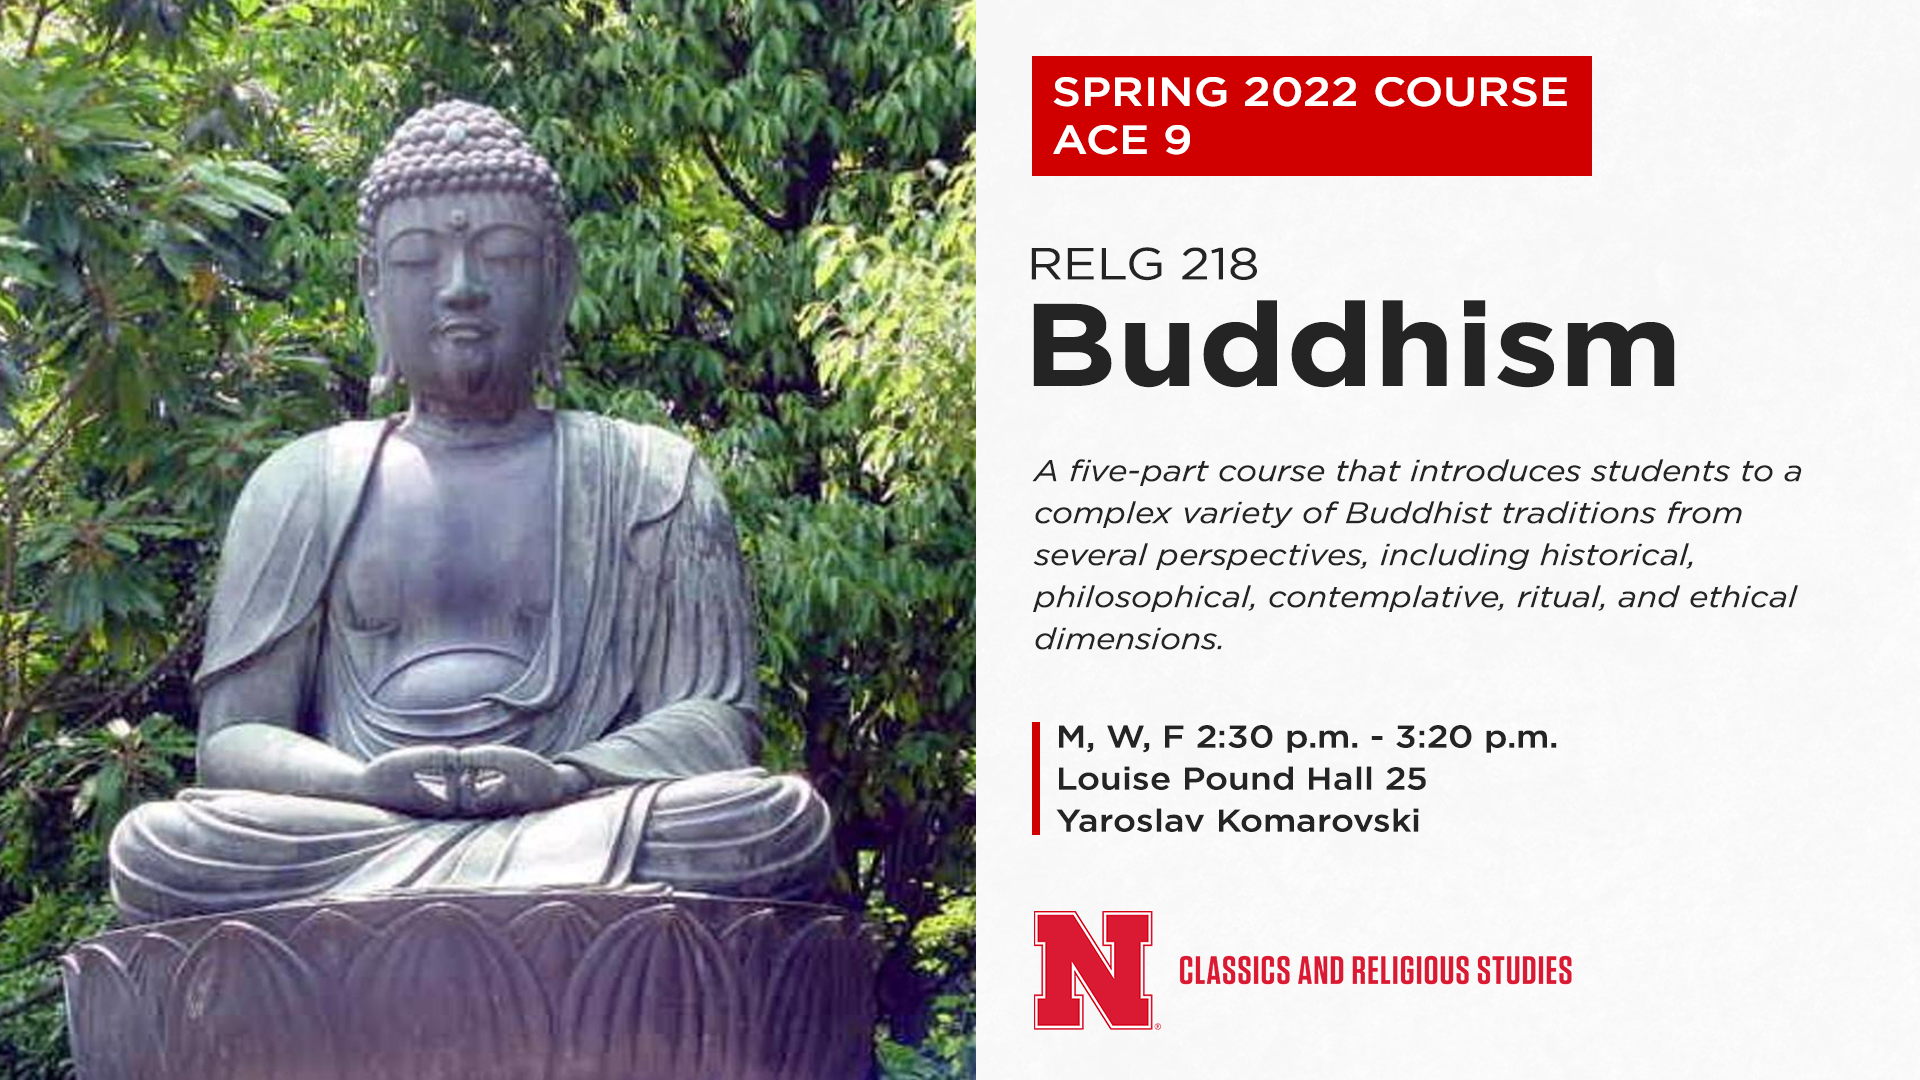 Photo Credit: Buddhism course details